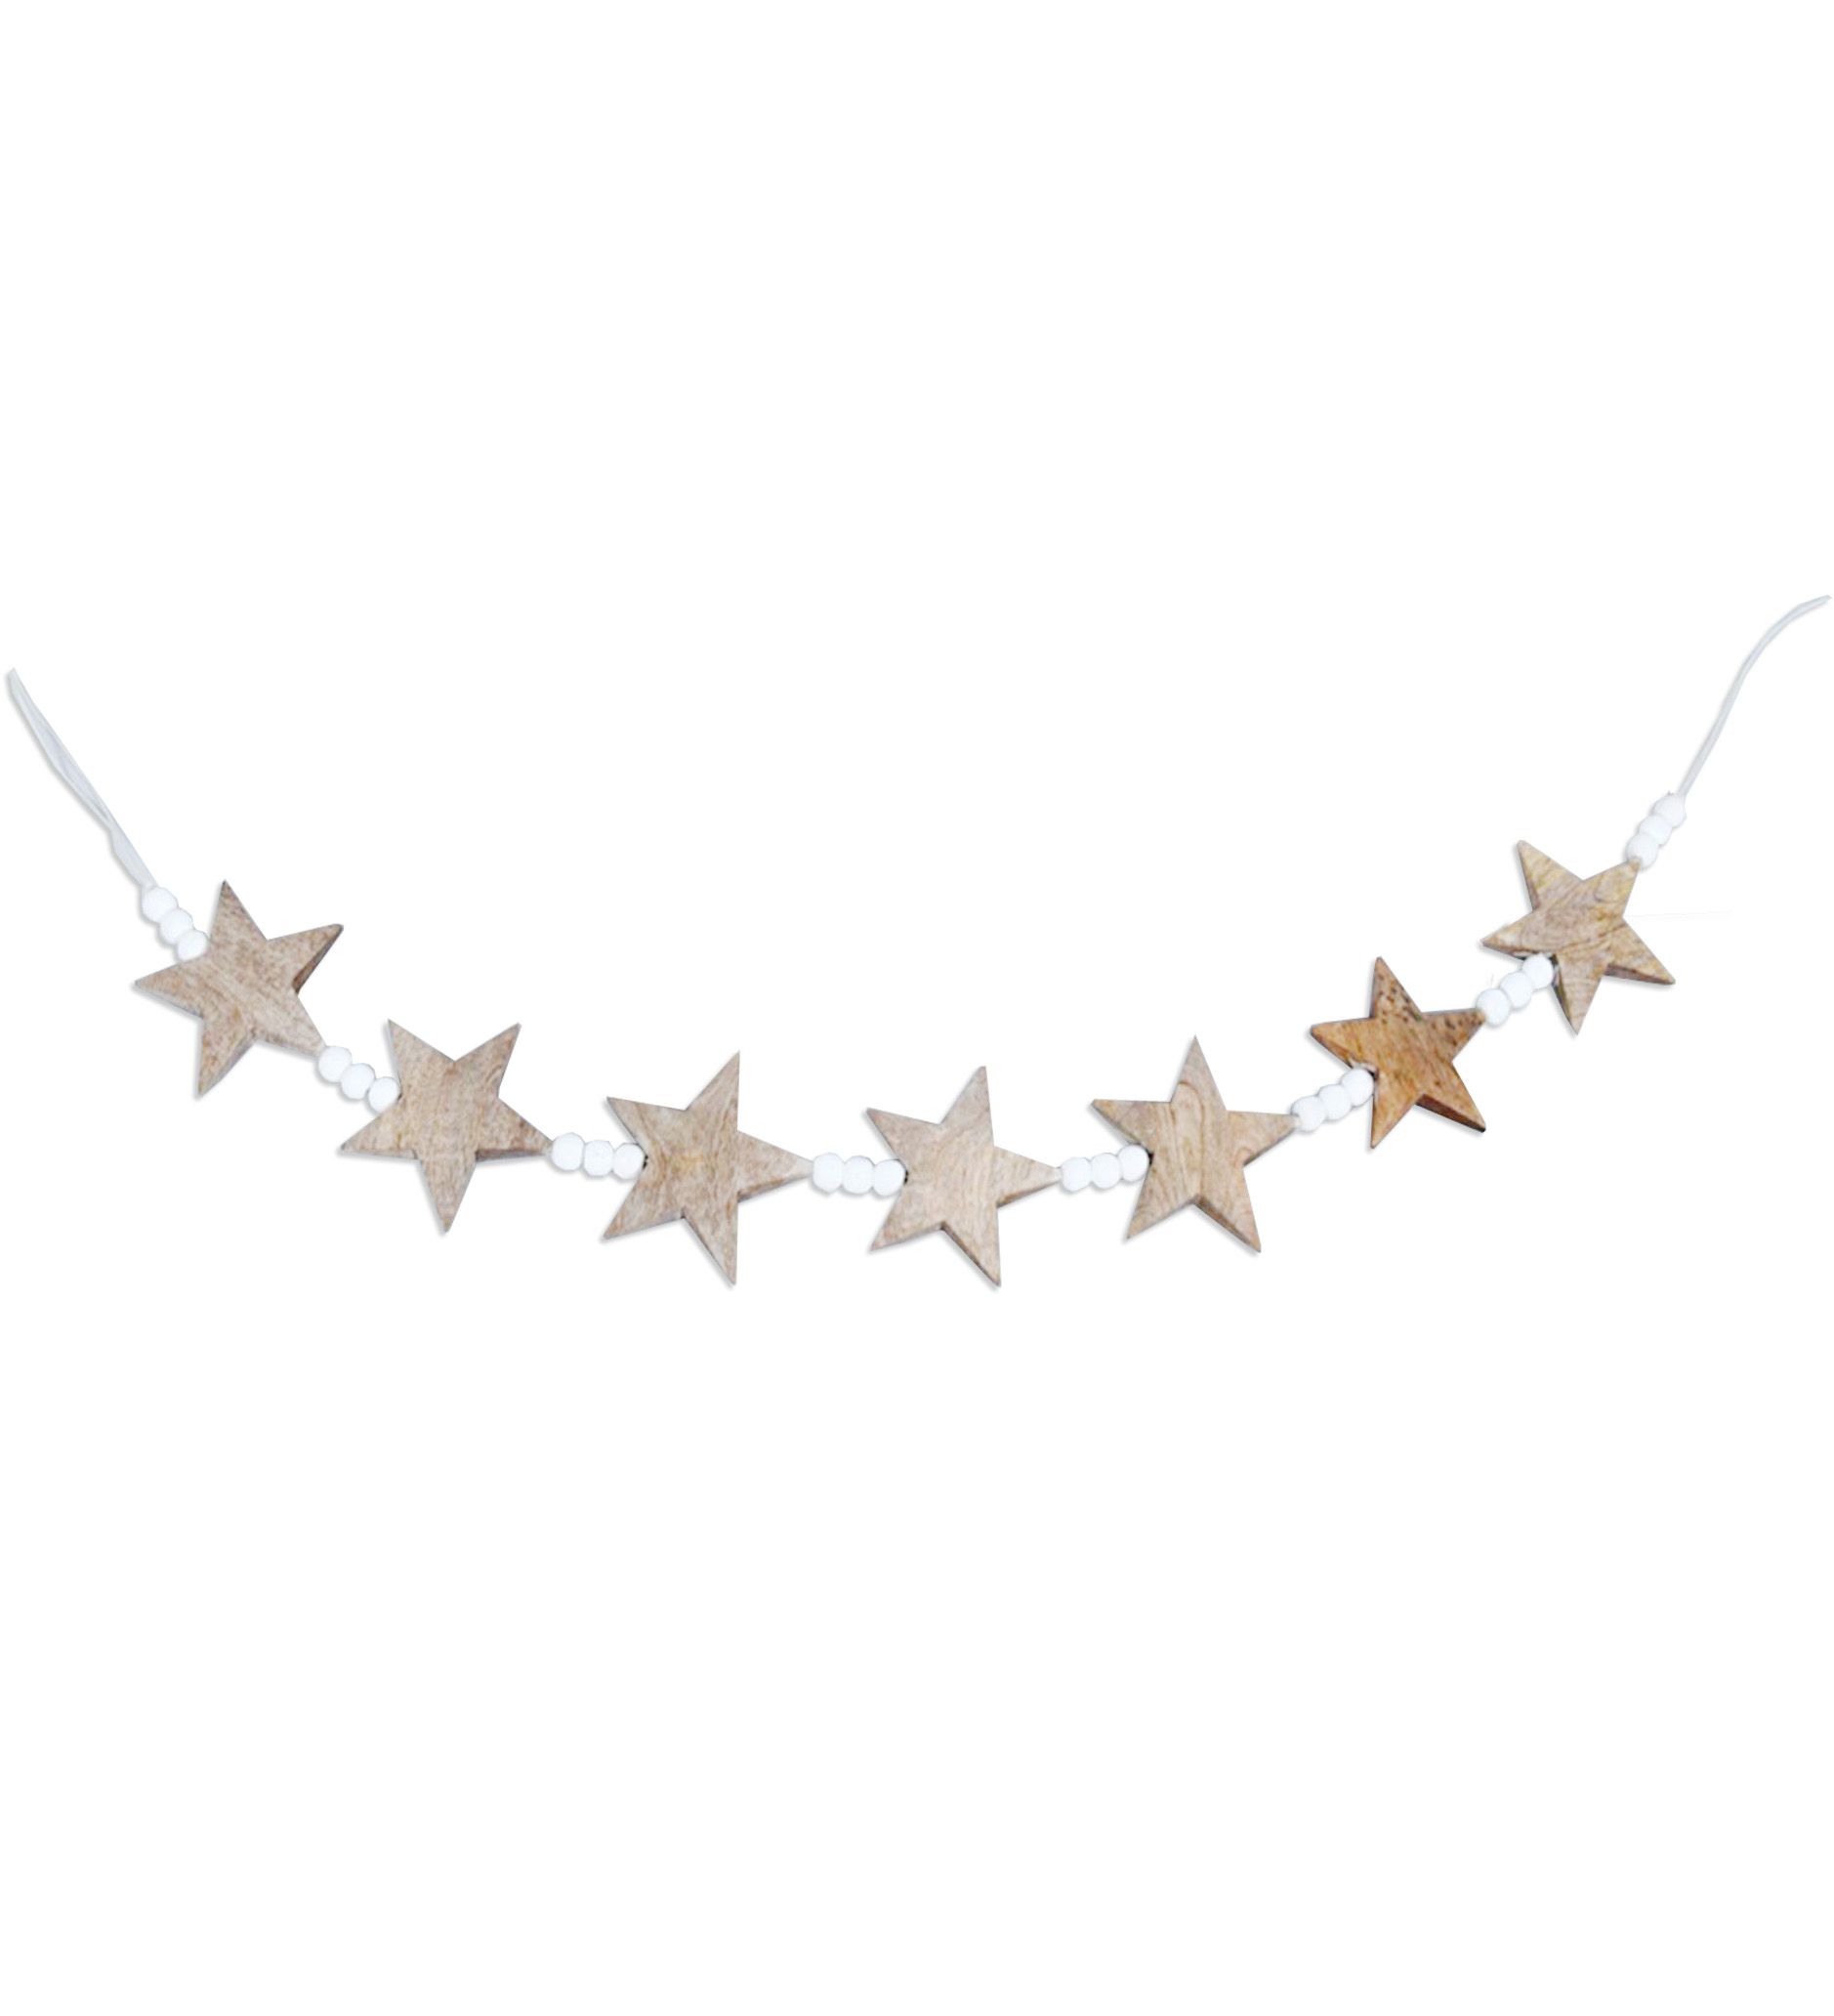 Hanging Wooden Beaded Garland With Stars Gift